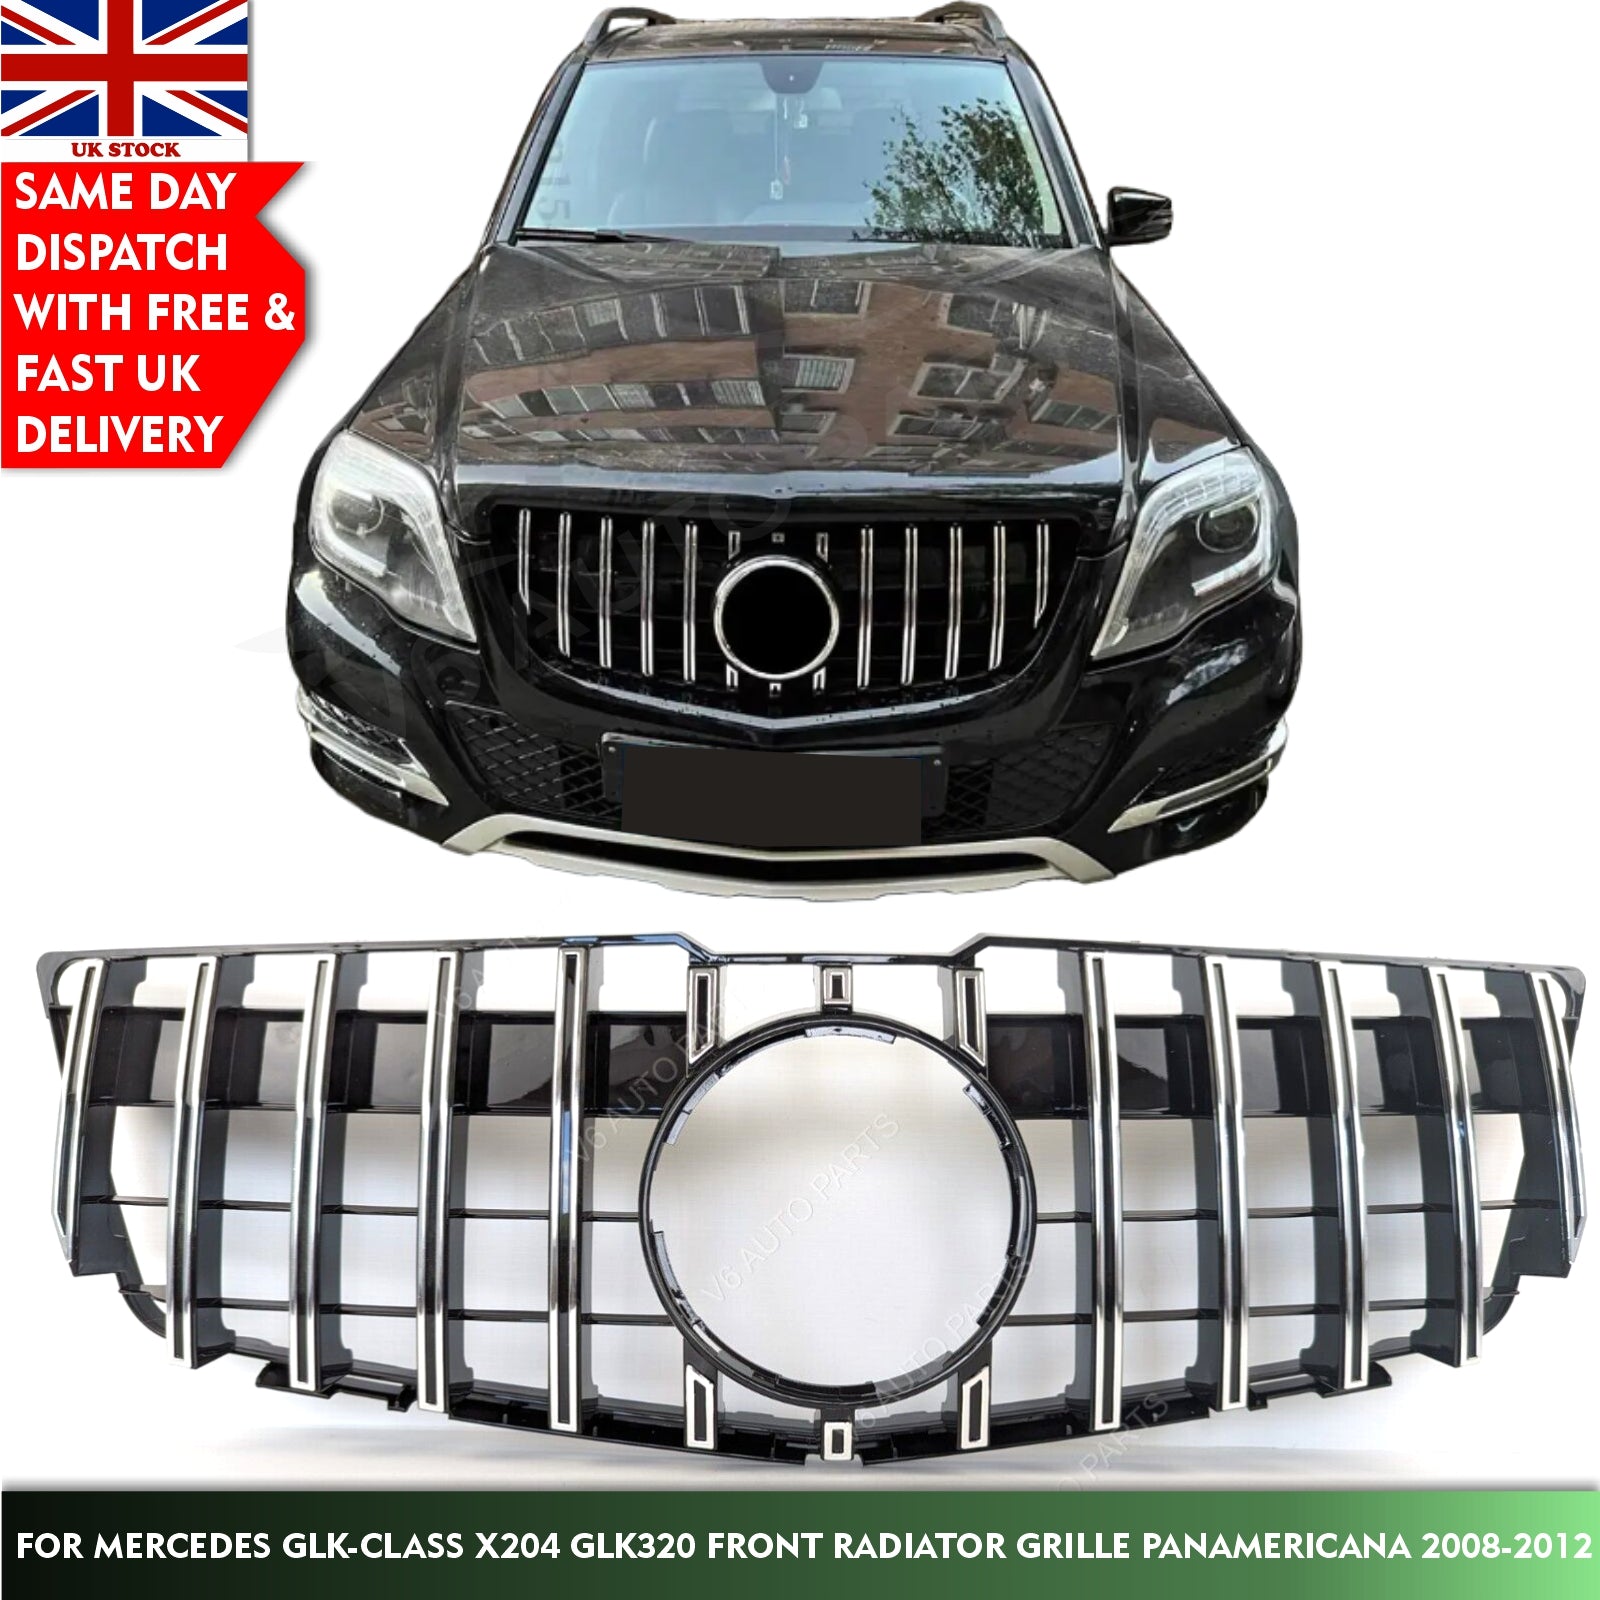 For Mercedes GLK-Class X204 Front Bumper Grille Panamericana AMG GT-R 2008-2012